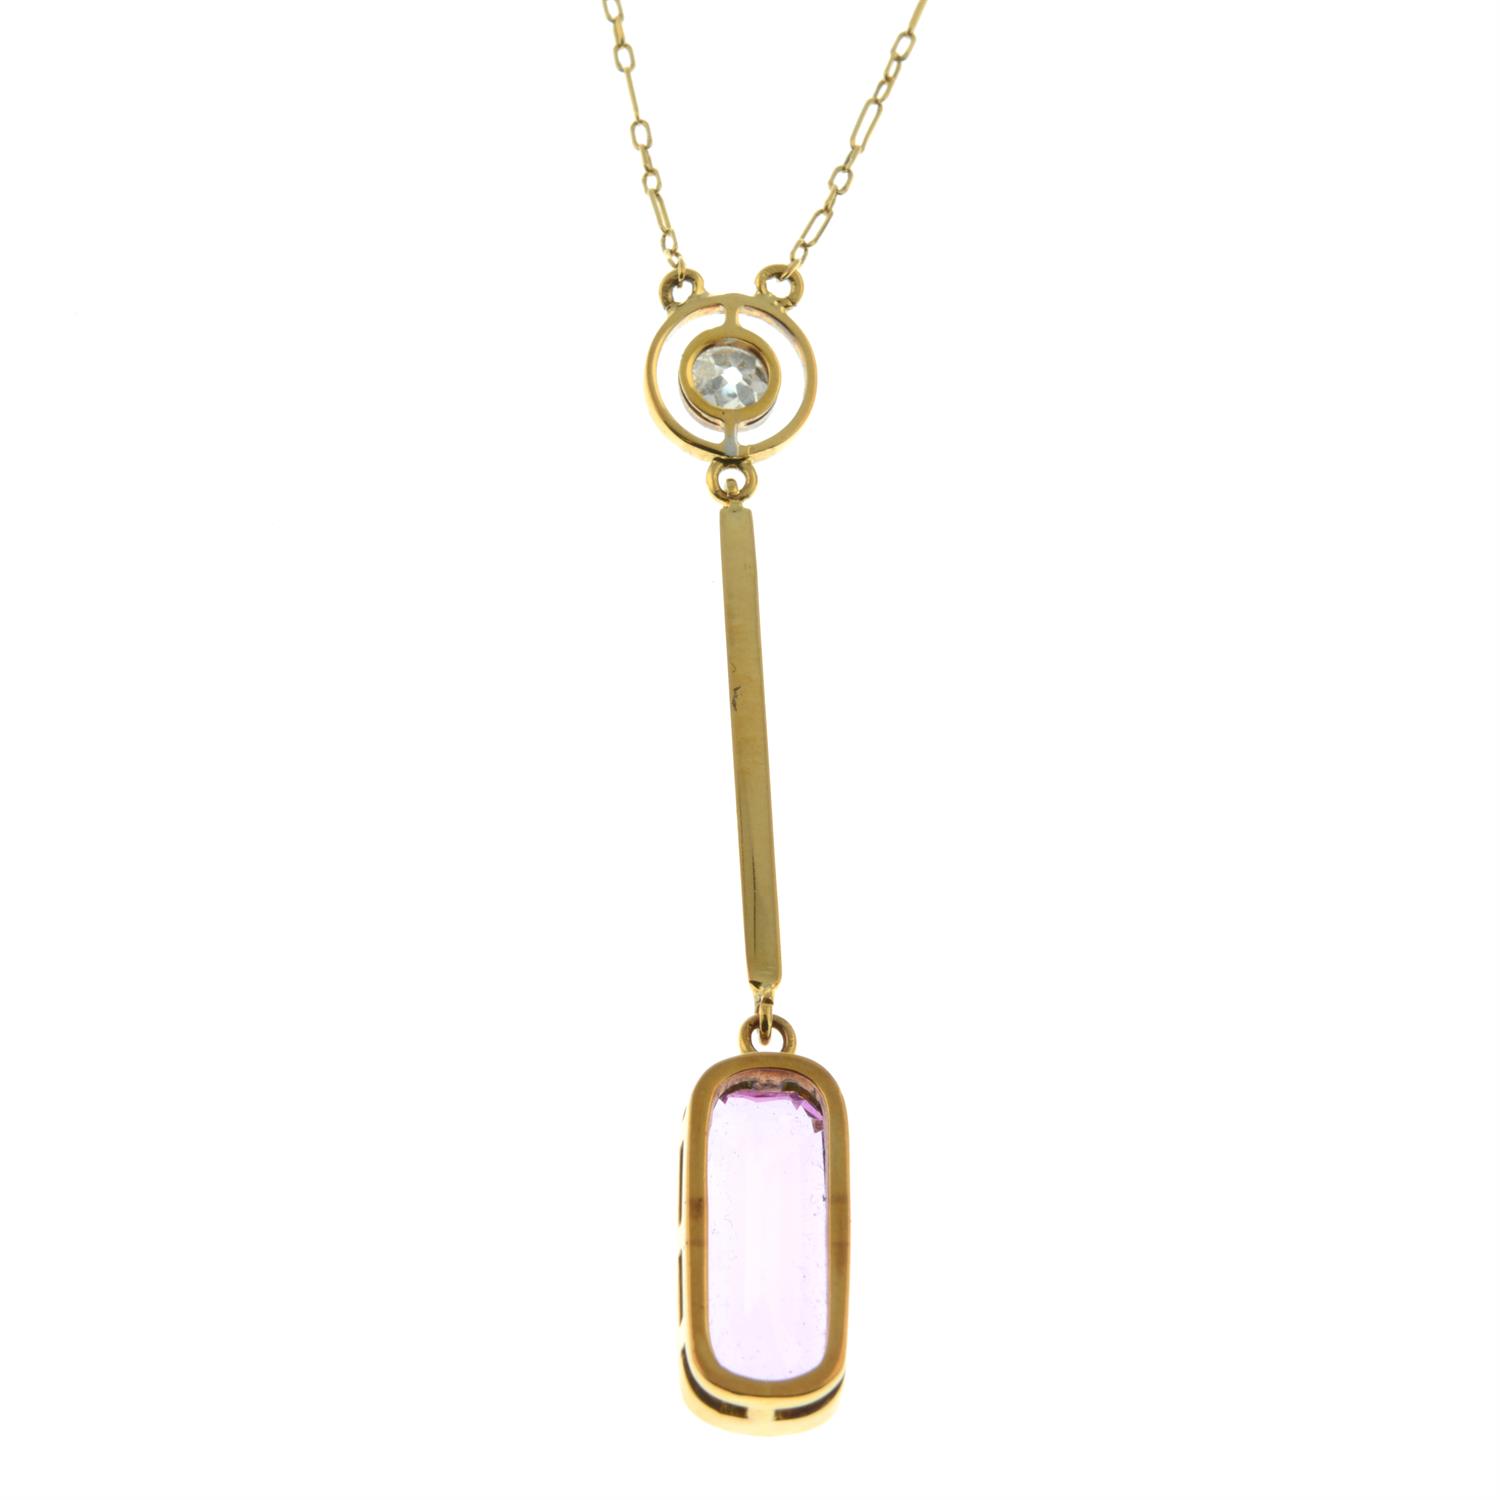 An early 20th century 15ct gold pink topaz and old-cut diamond pendant, on chain. - Image 3 of 5